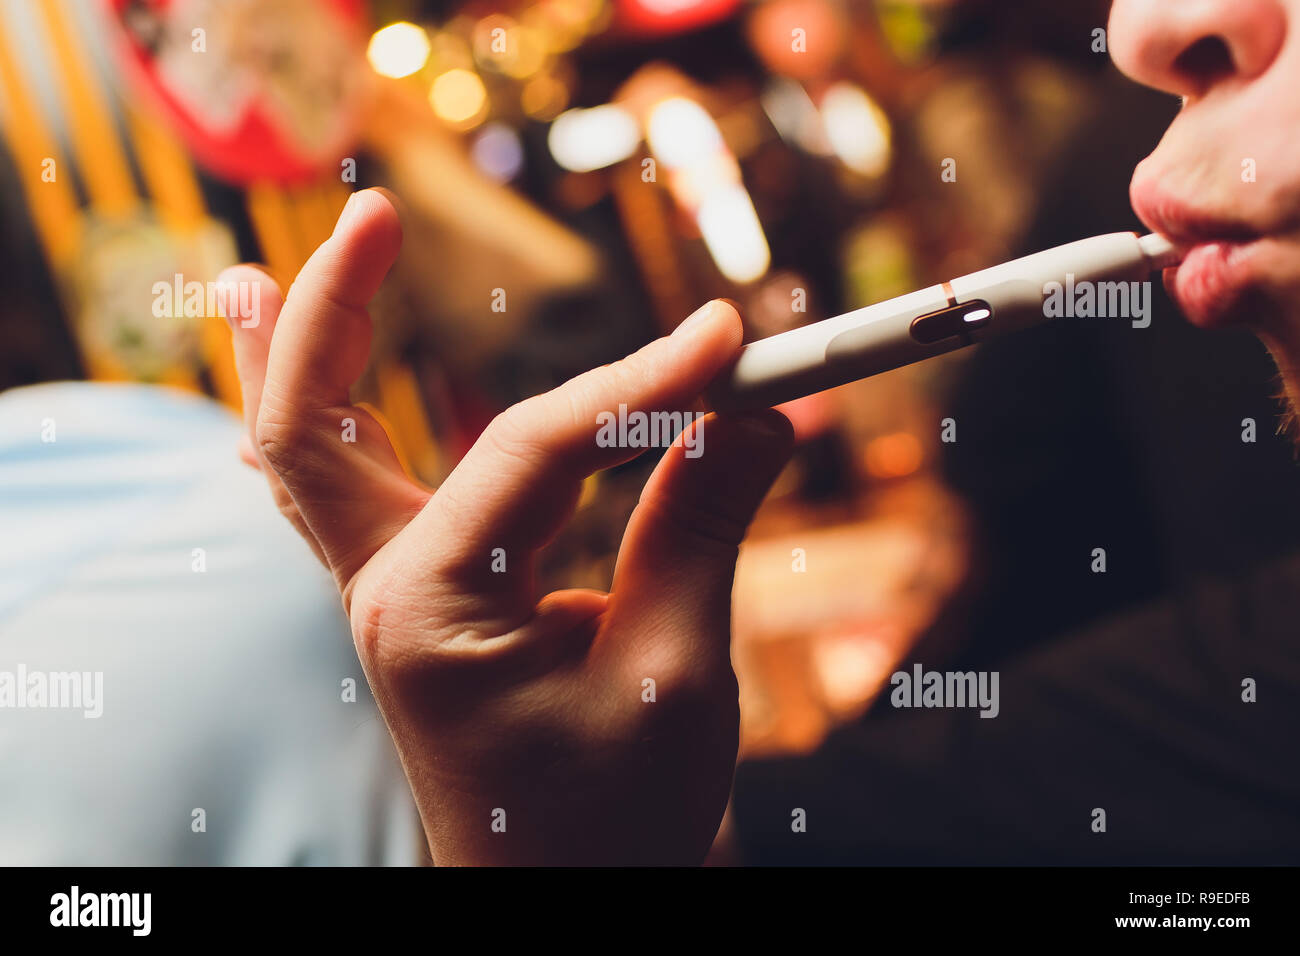 IQOS heat-not-burn tobacco product technology. Man holding e-cigarette in  his hand before smoking Stock Photo - Alamy